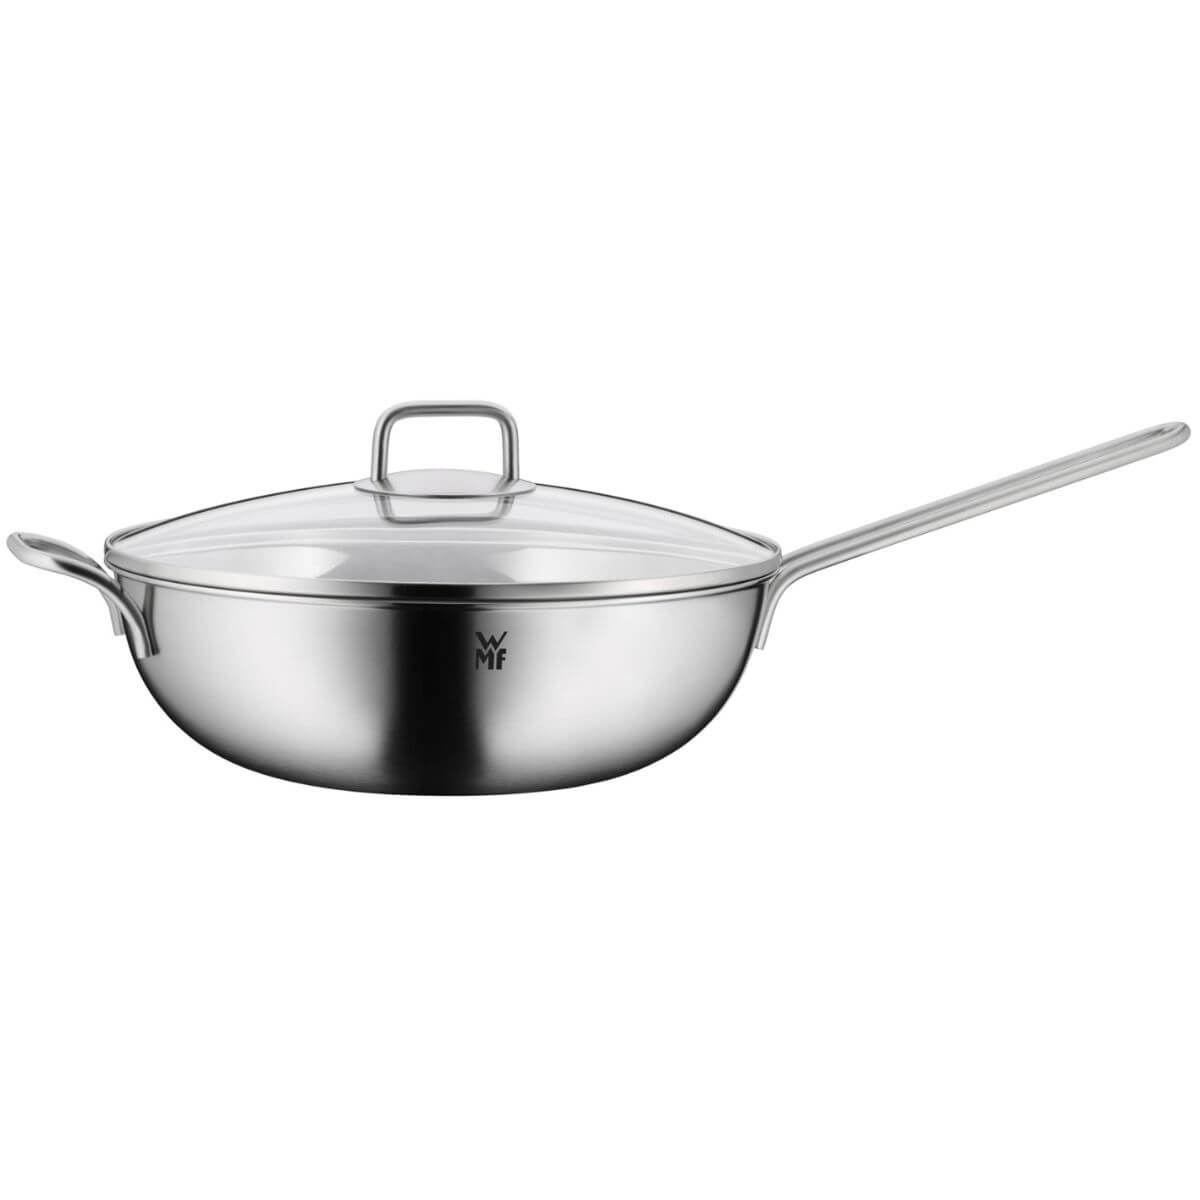 WMF Select IT Wok with Lid